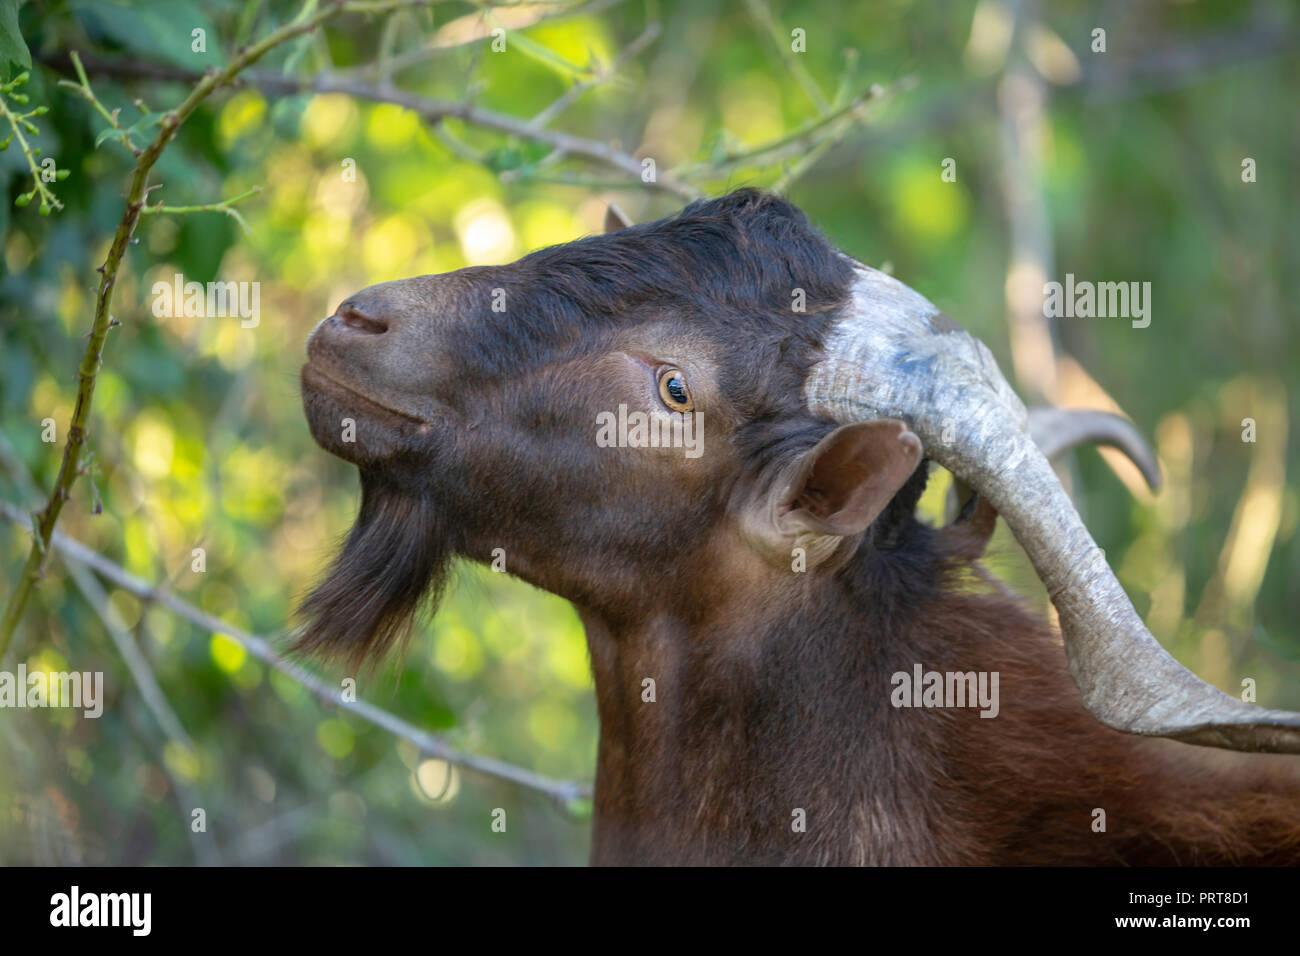 Close up of a Billy goat with big horns eating green leafs. Stock Photo